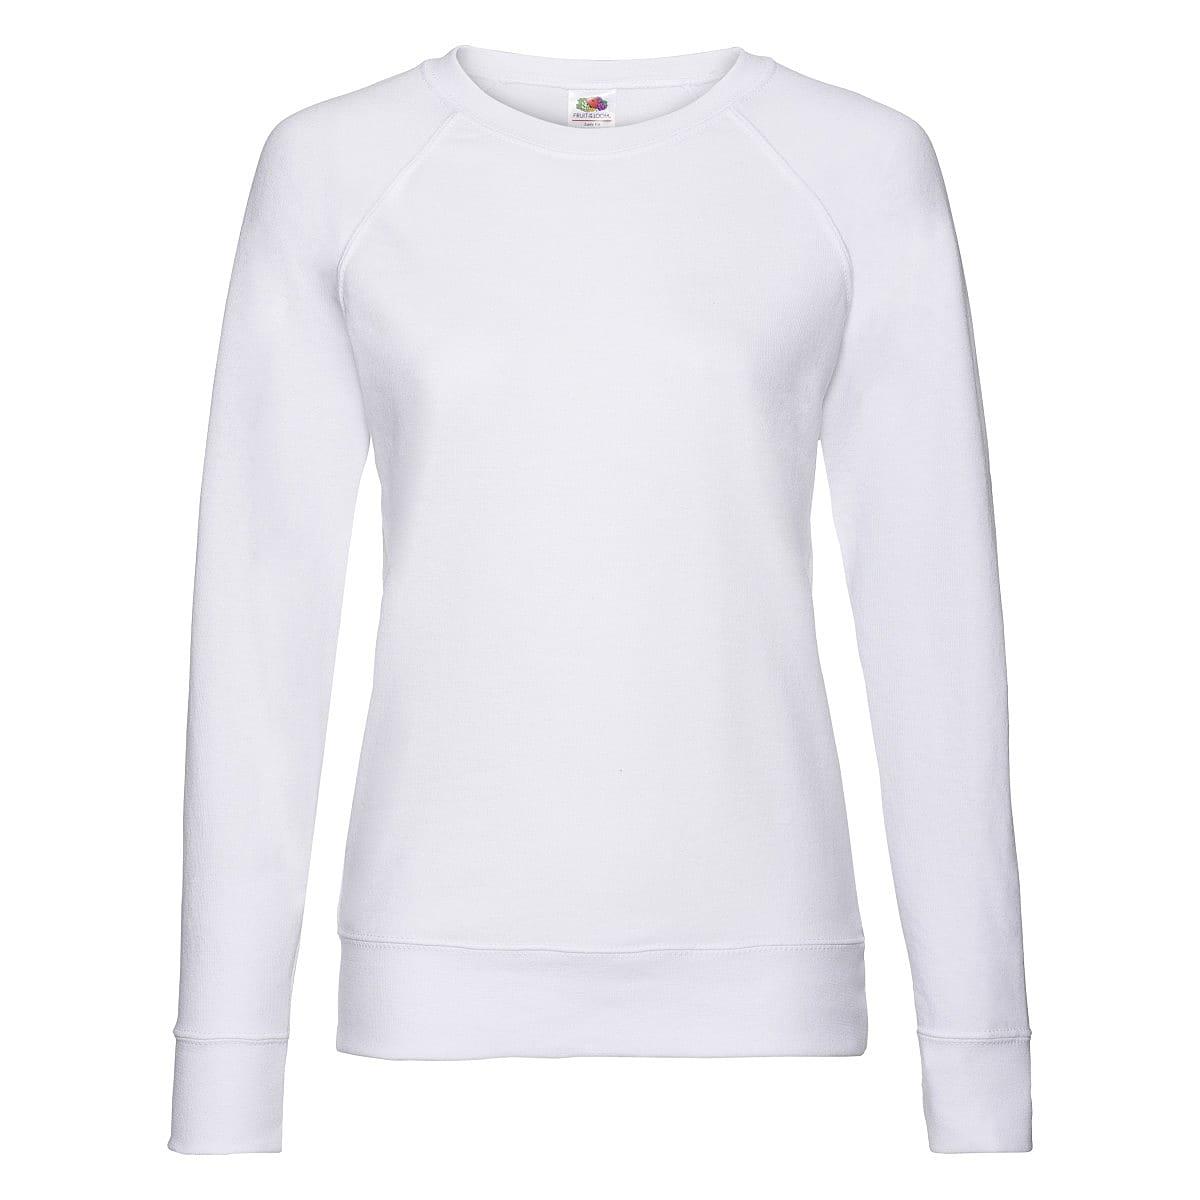 Fruit Of The Loom Lady-Fit Lightweight Raglan Sweater in White (Product Code: 62146)